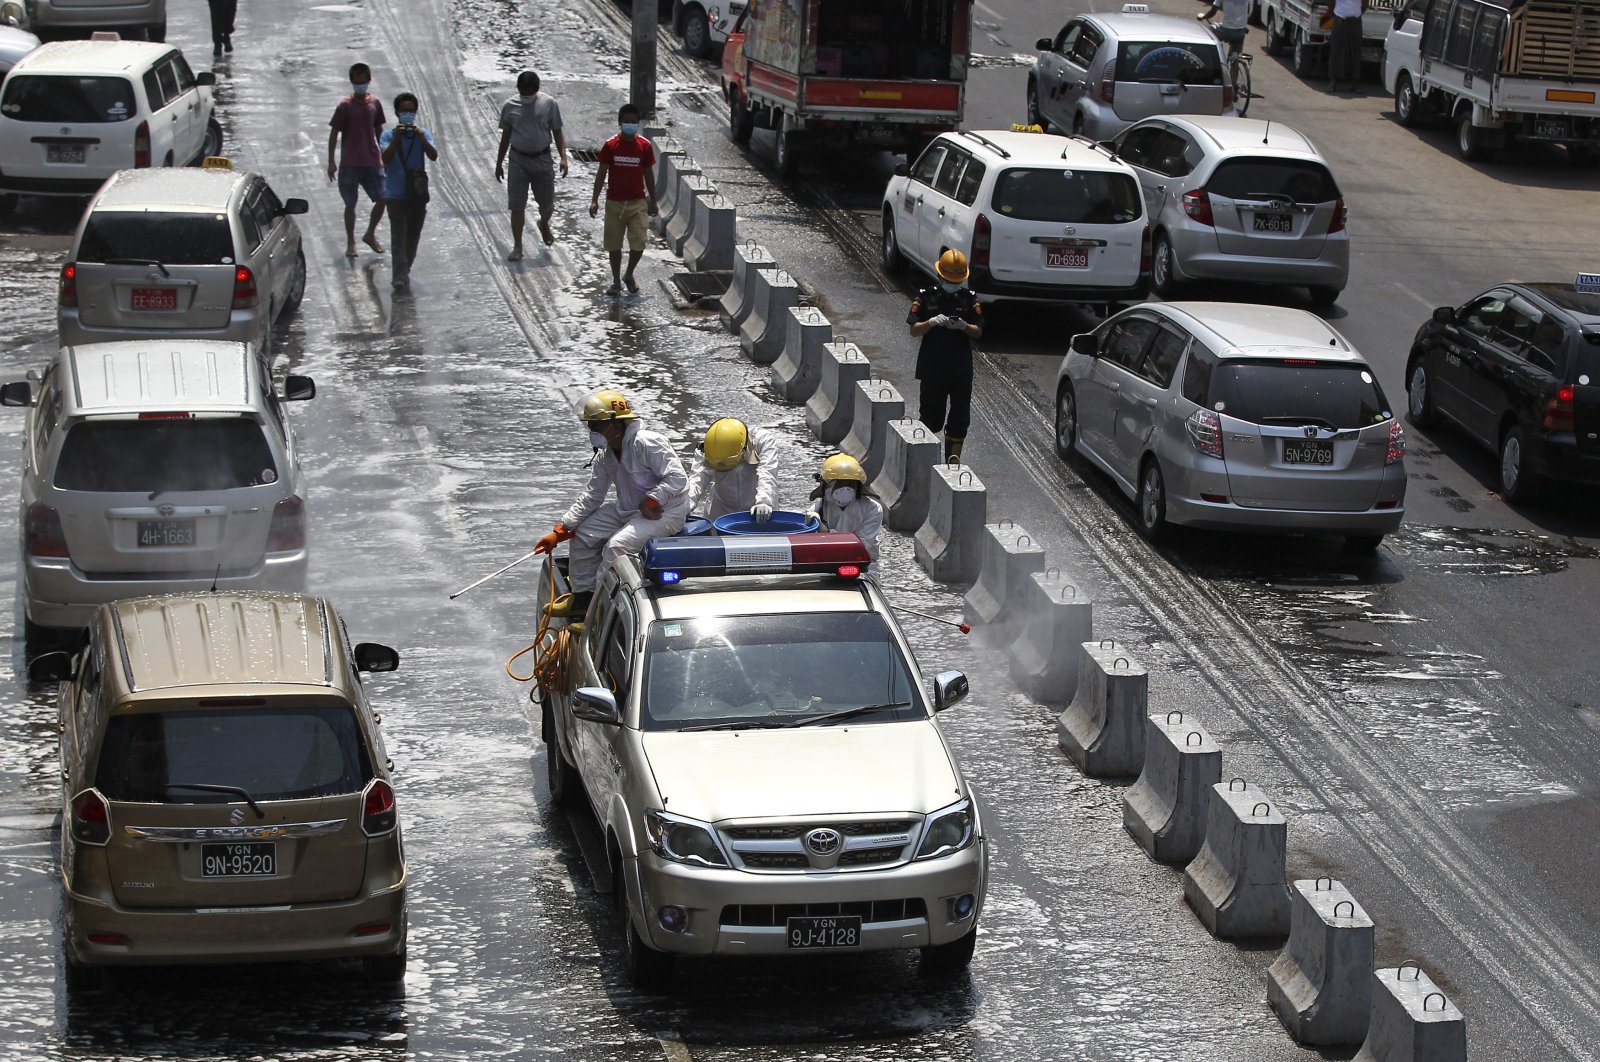 The fire department spray disinfectant to help curb the spread of the new coronavirus on a road Tuesday, April 21, 2020, in Yangon, Myanmar. (AP Photo)